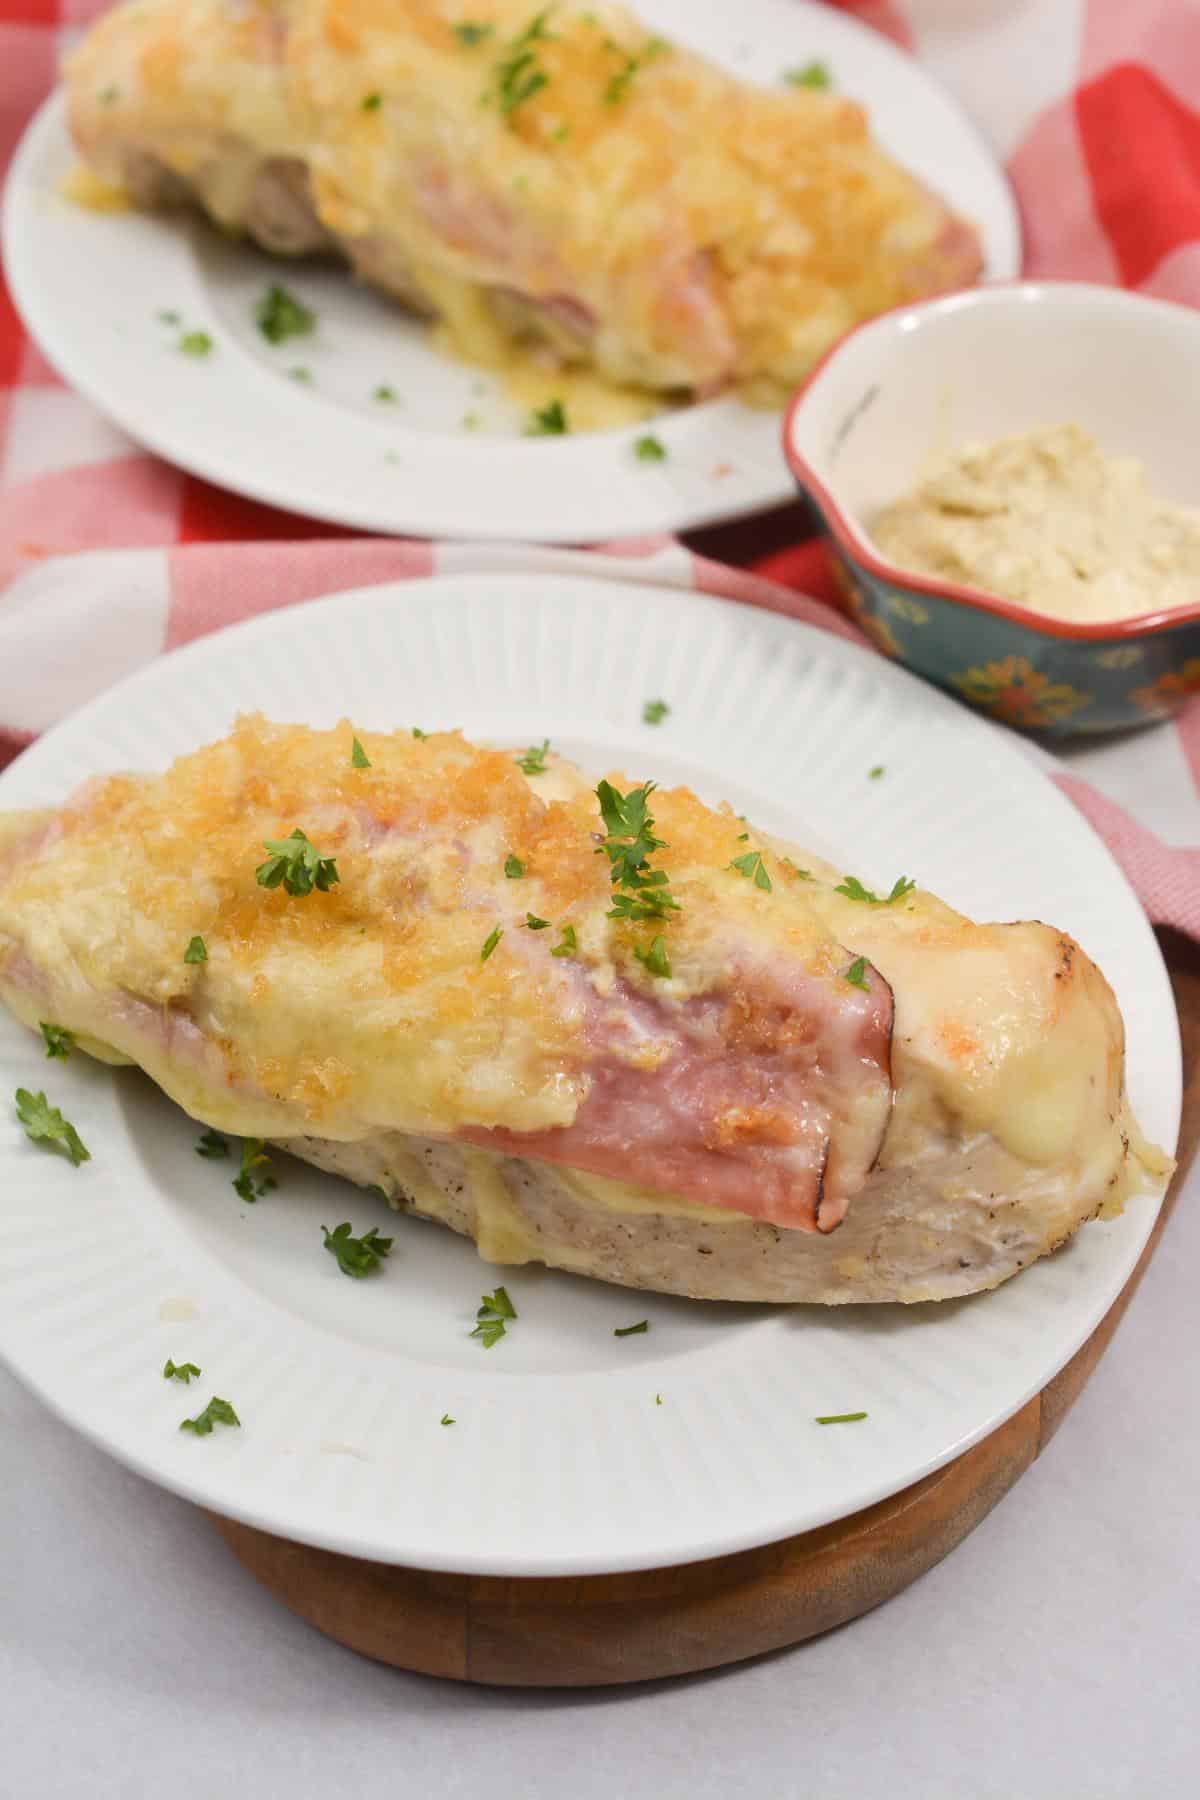 Chicken cordon bleu on a serving plate, garnished with parsley.